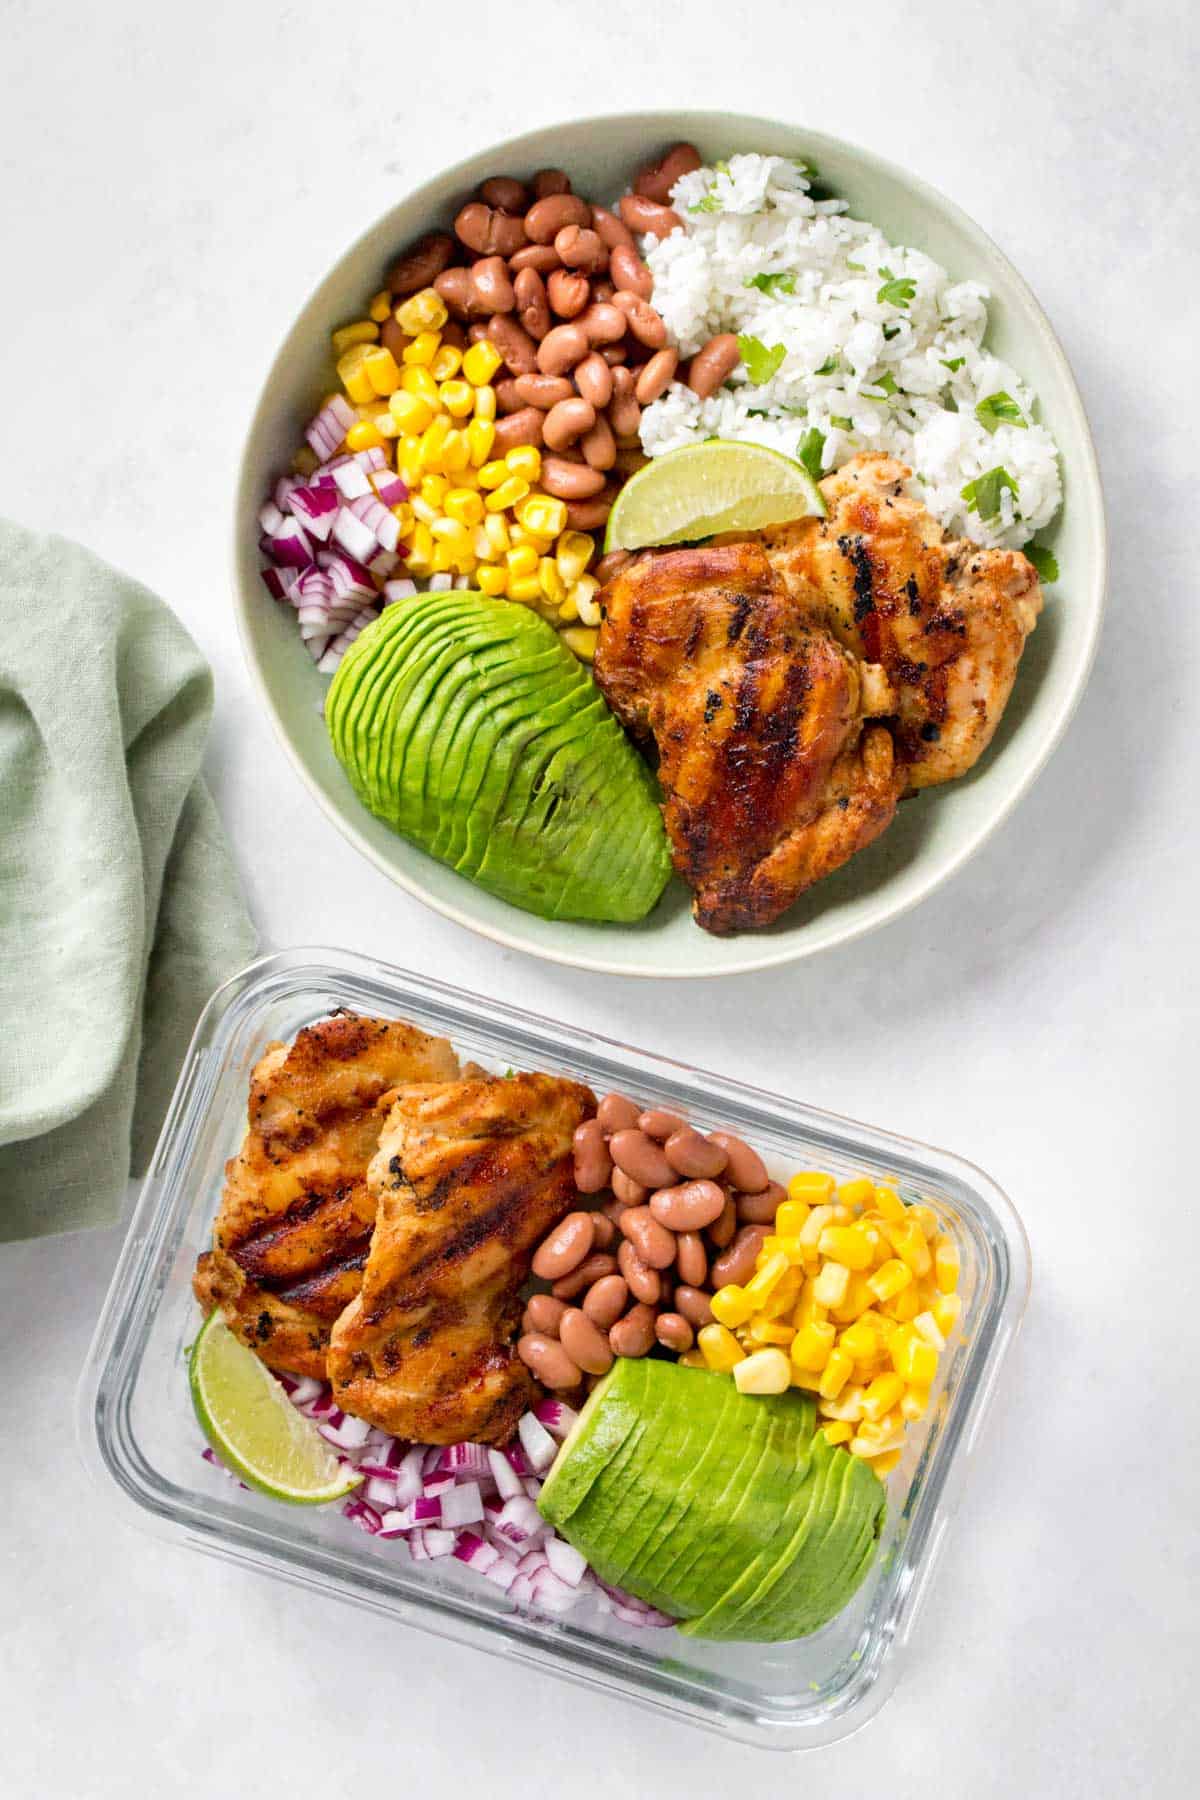 Meal prep container and a plate each with grilled cilantro lime chicken thighs, corn, pinto beans, red onions, sliced avocado, and a wedge of lime.